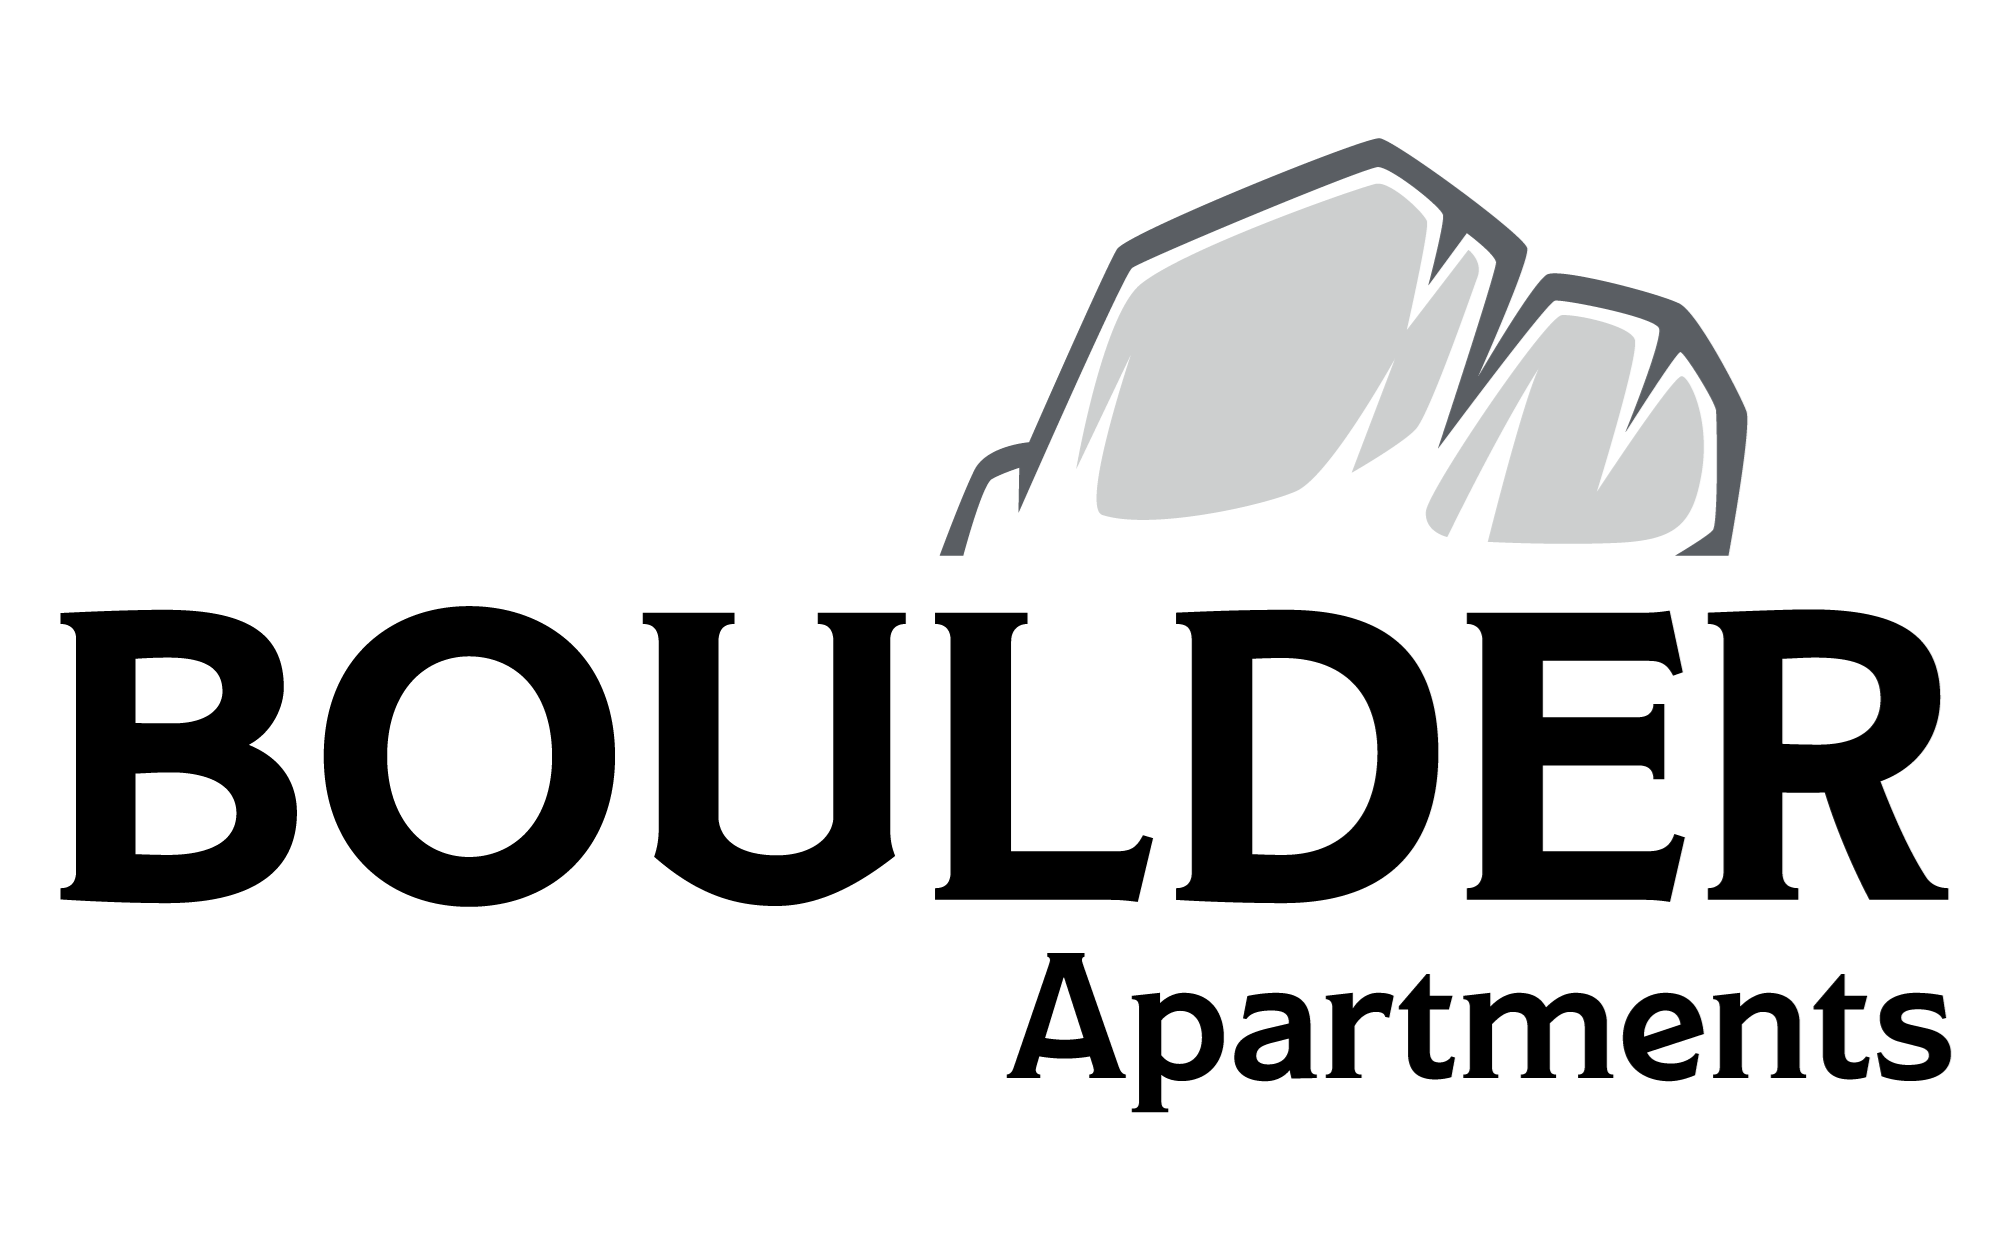 Boulder Logo - The Boulder Apartments. Apartments in Cheney, WA